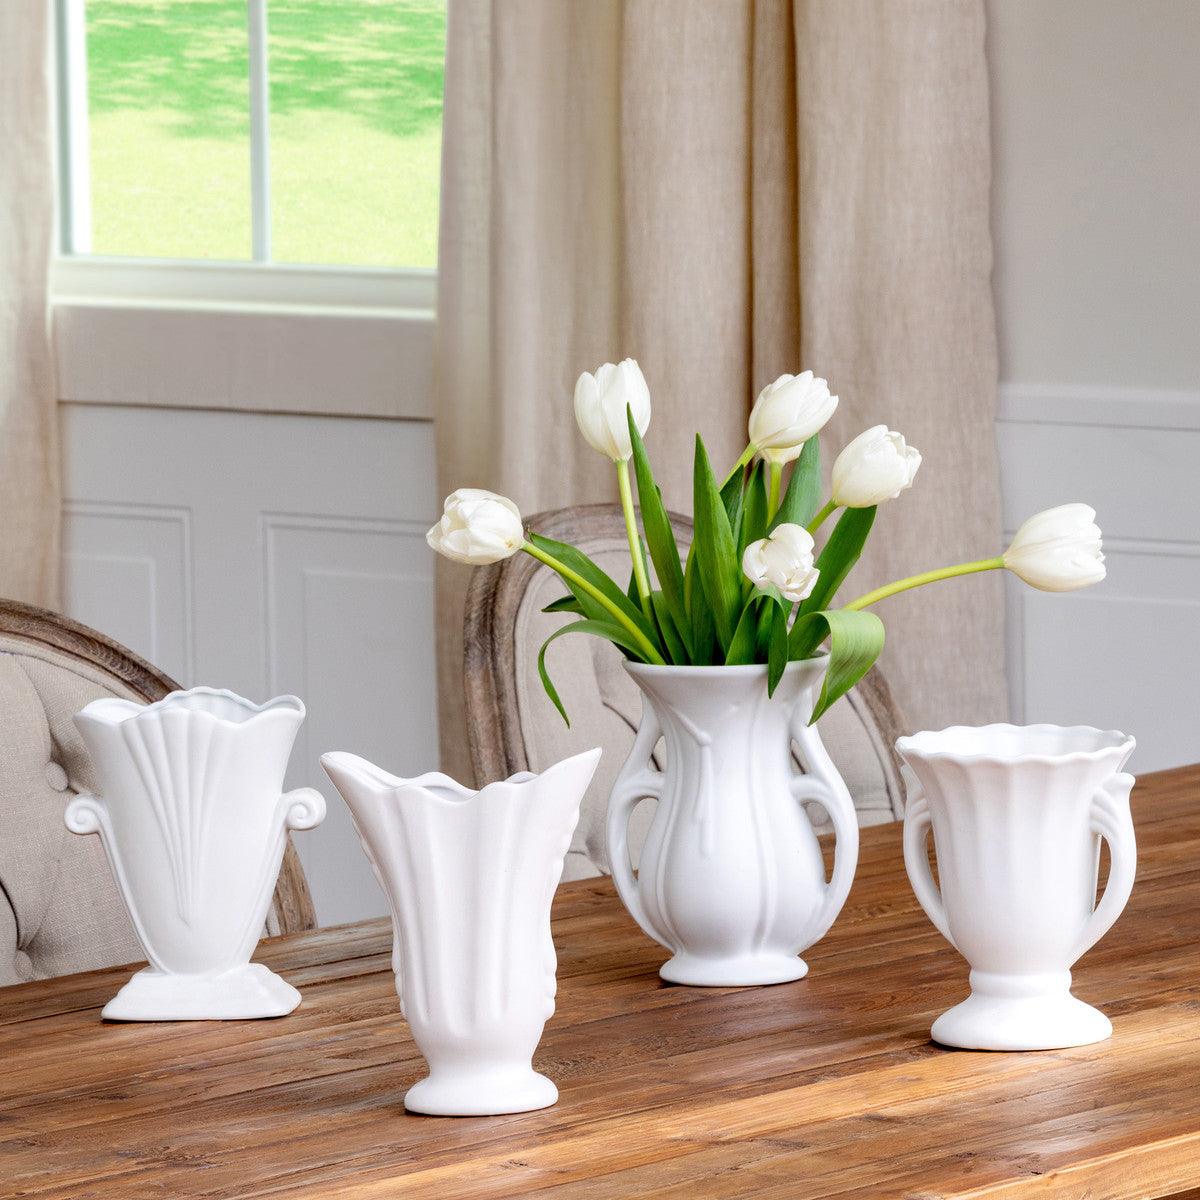 Vintage-Style Flower Vase Collection, Set of 4 - Signastyle Boutique